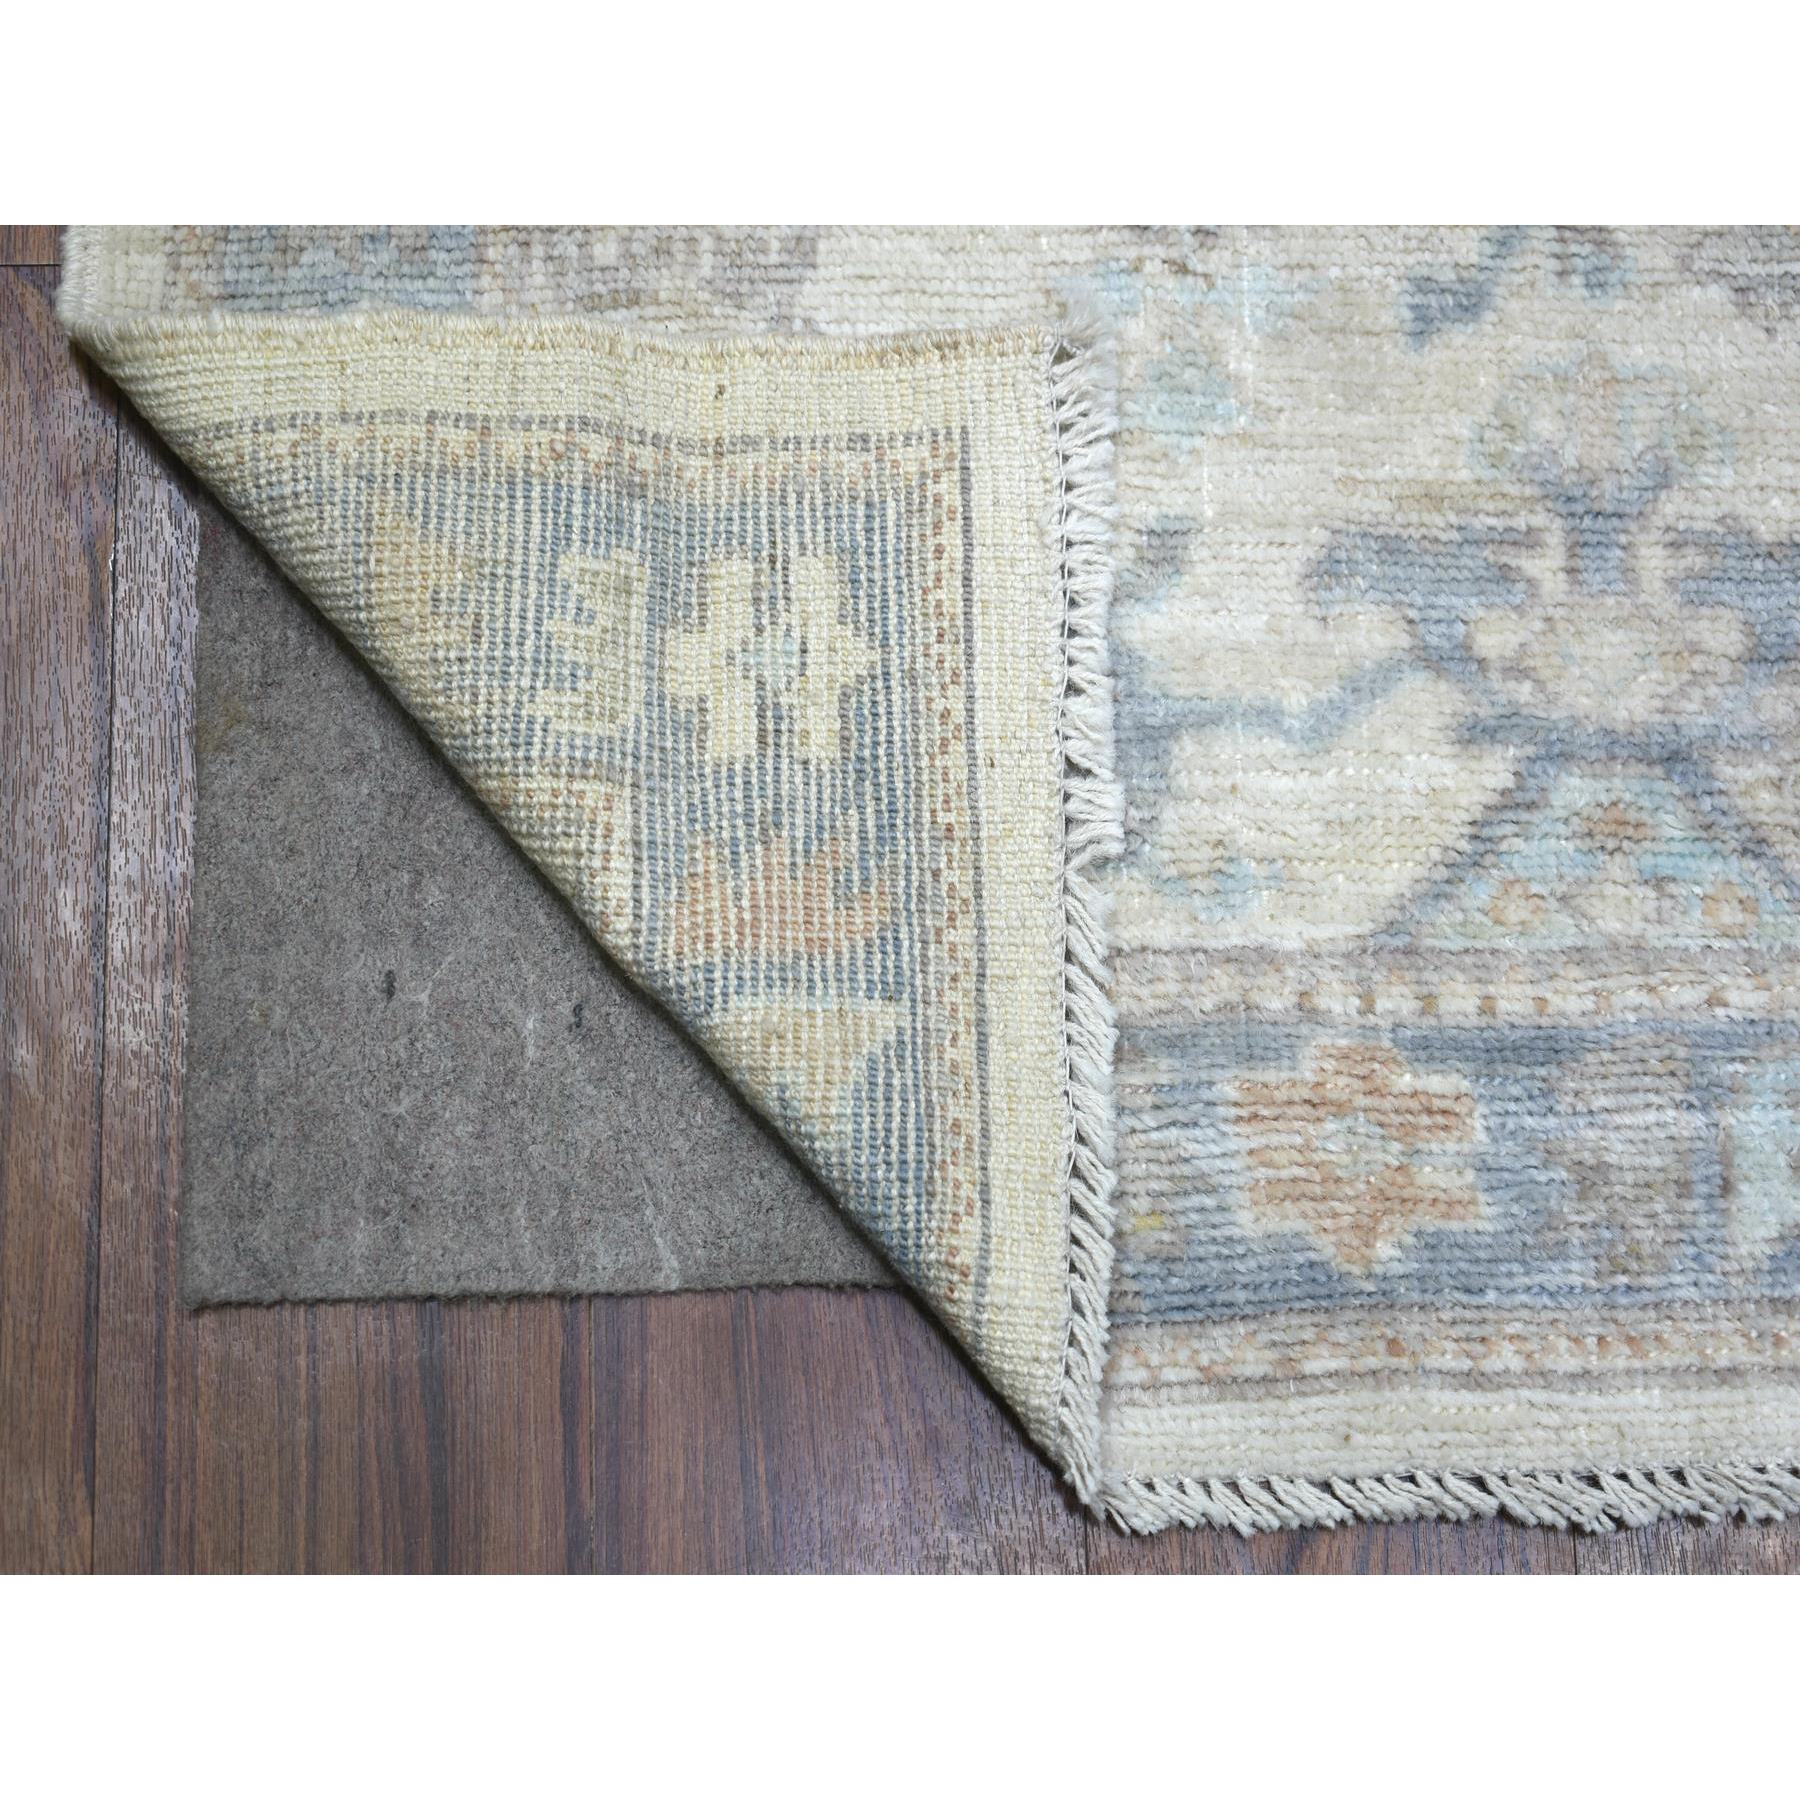 2'10"x9'5" Ivory Natural Dyes Angora Oushak With Colorful Leaf Design, Afghan Wool Hand Woven Runner Oriental Rug 